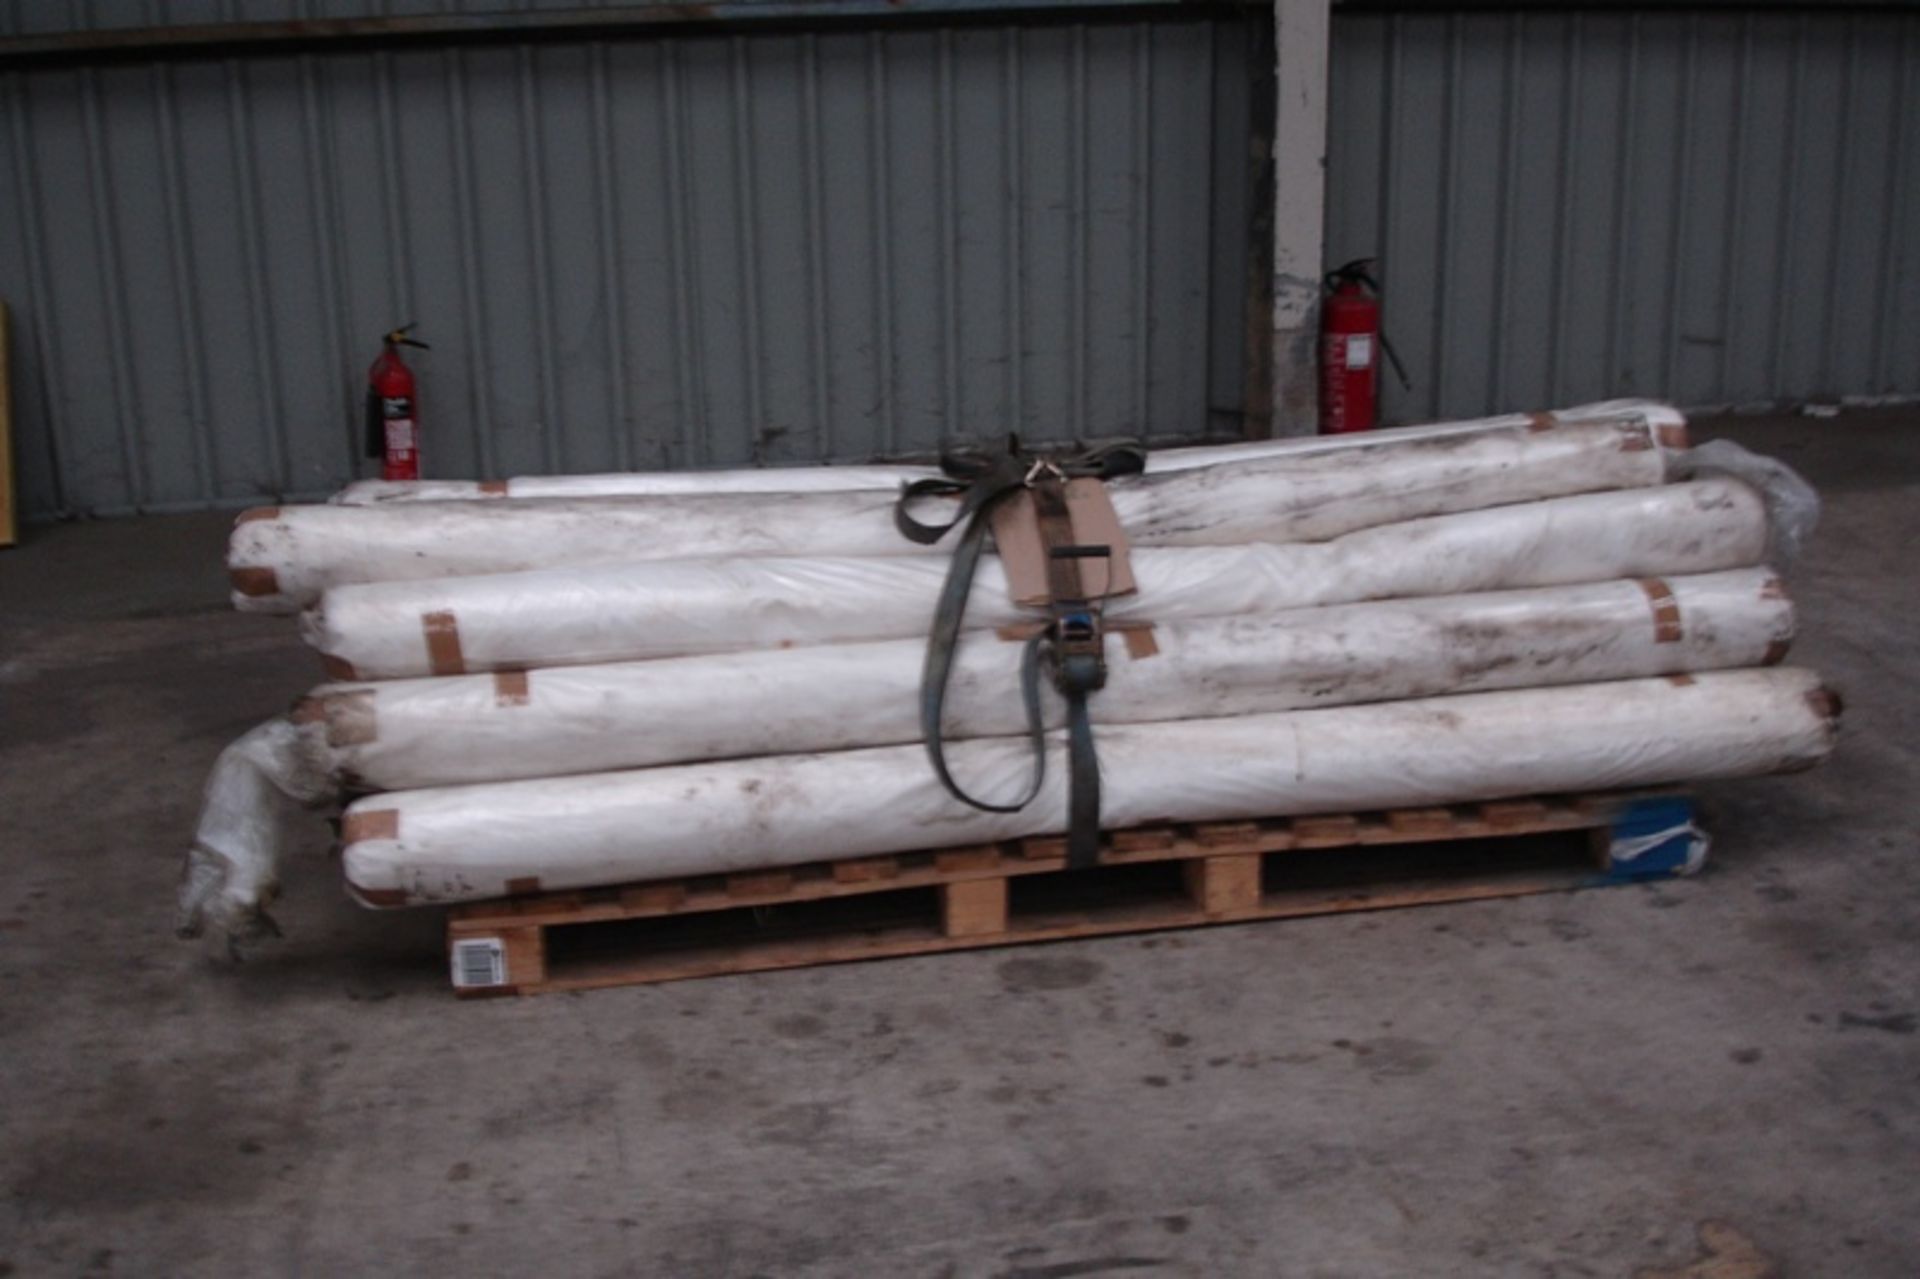 Pallet of 15 rolls of clear plastic sheeting